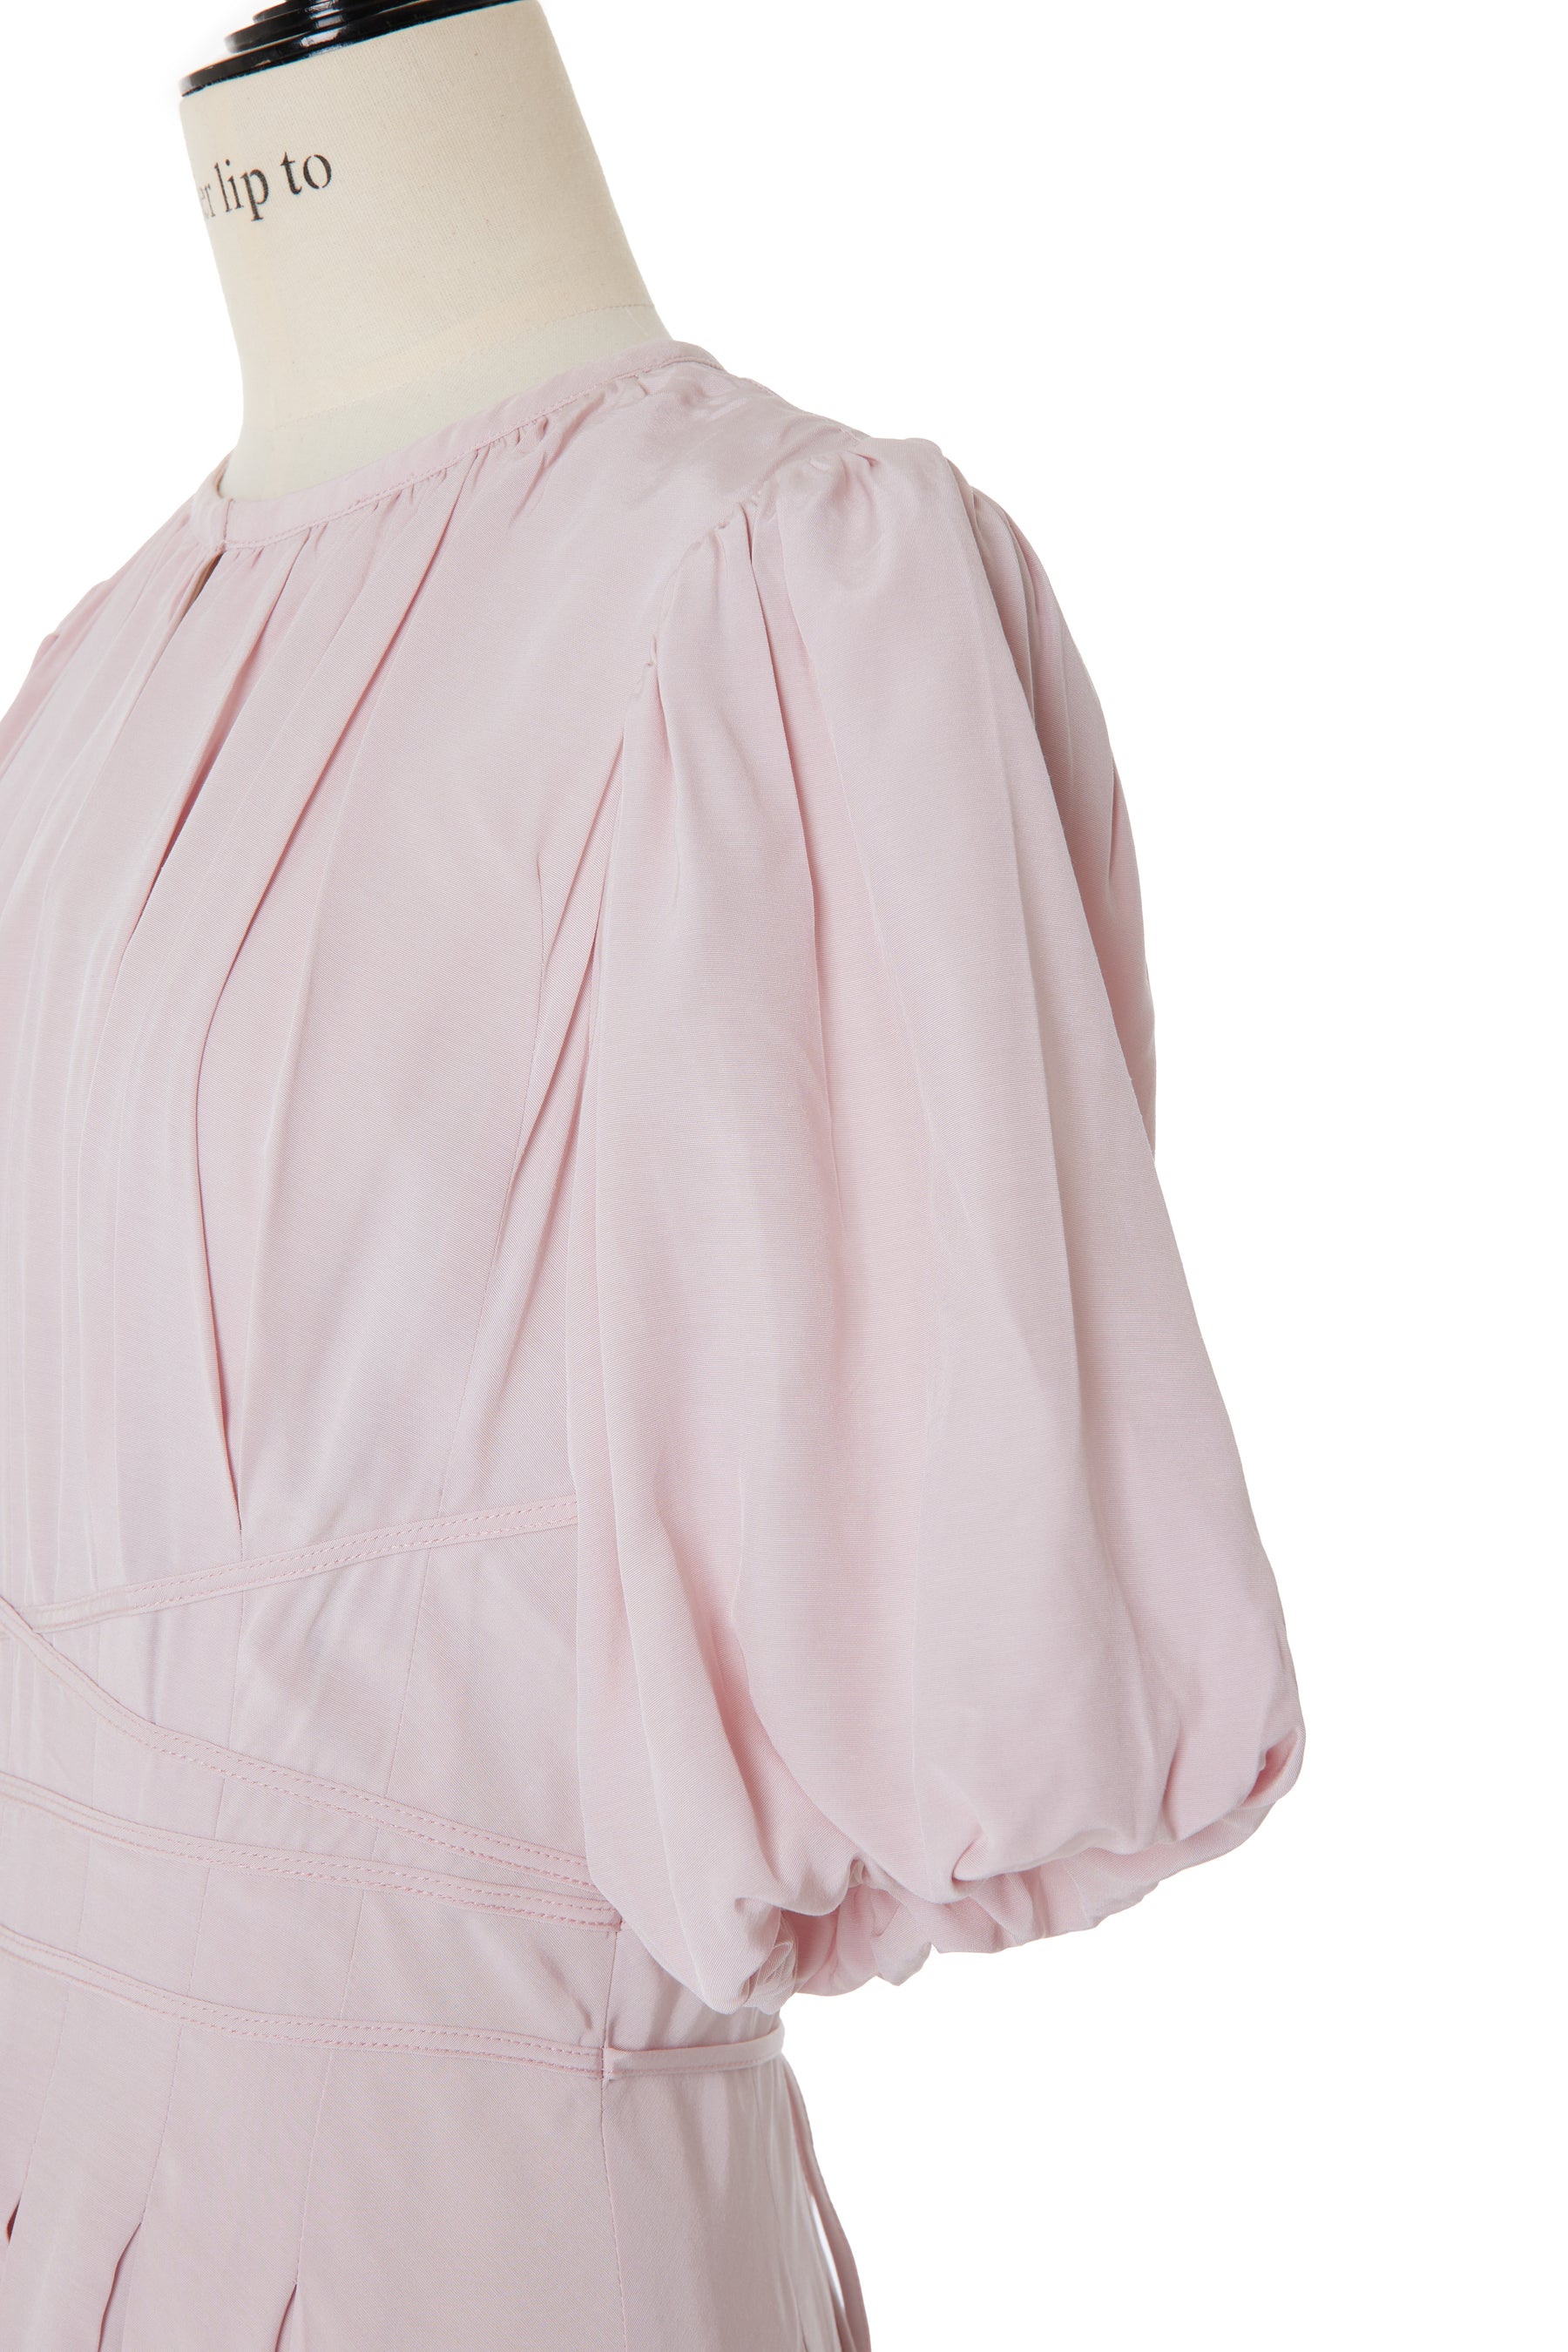 【sakura pink】【5月上旬発送】Fountain Lace Up Bow Dress